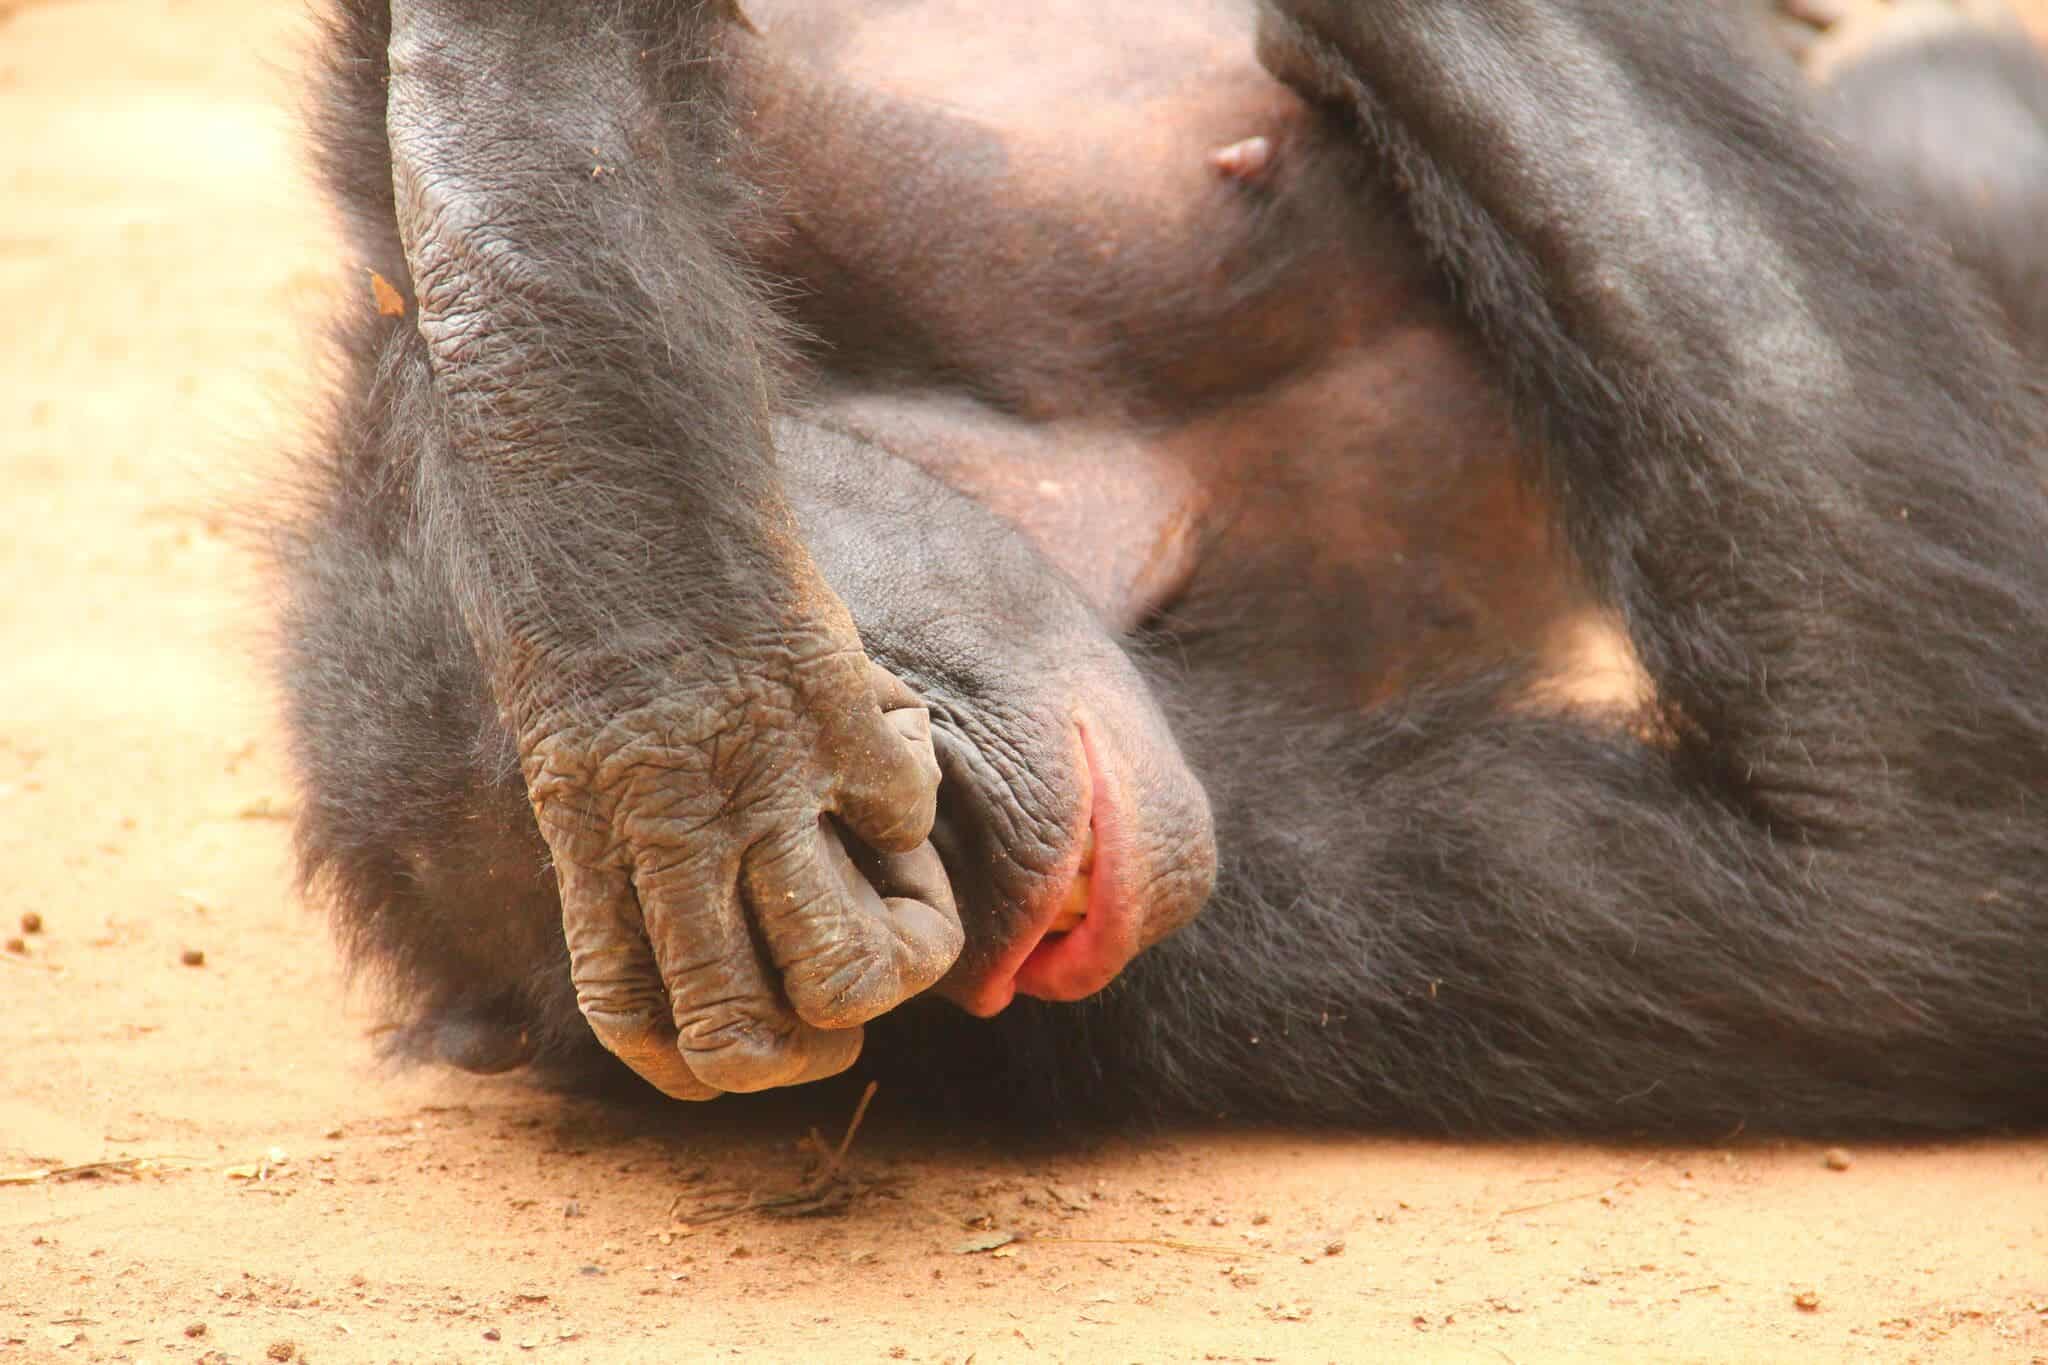 Bonobos, our closest relatives alongside chimps, seem have a similar disgust system to humans'. Credit: University of Kyoto.